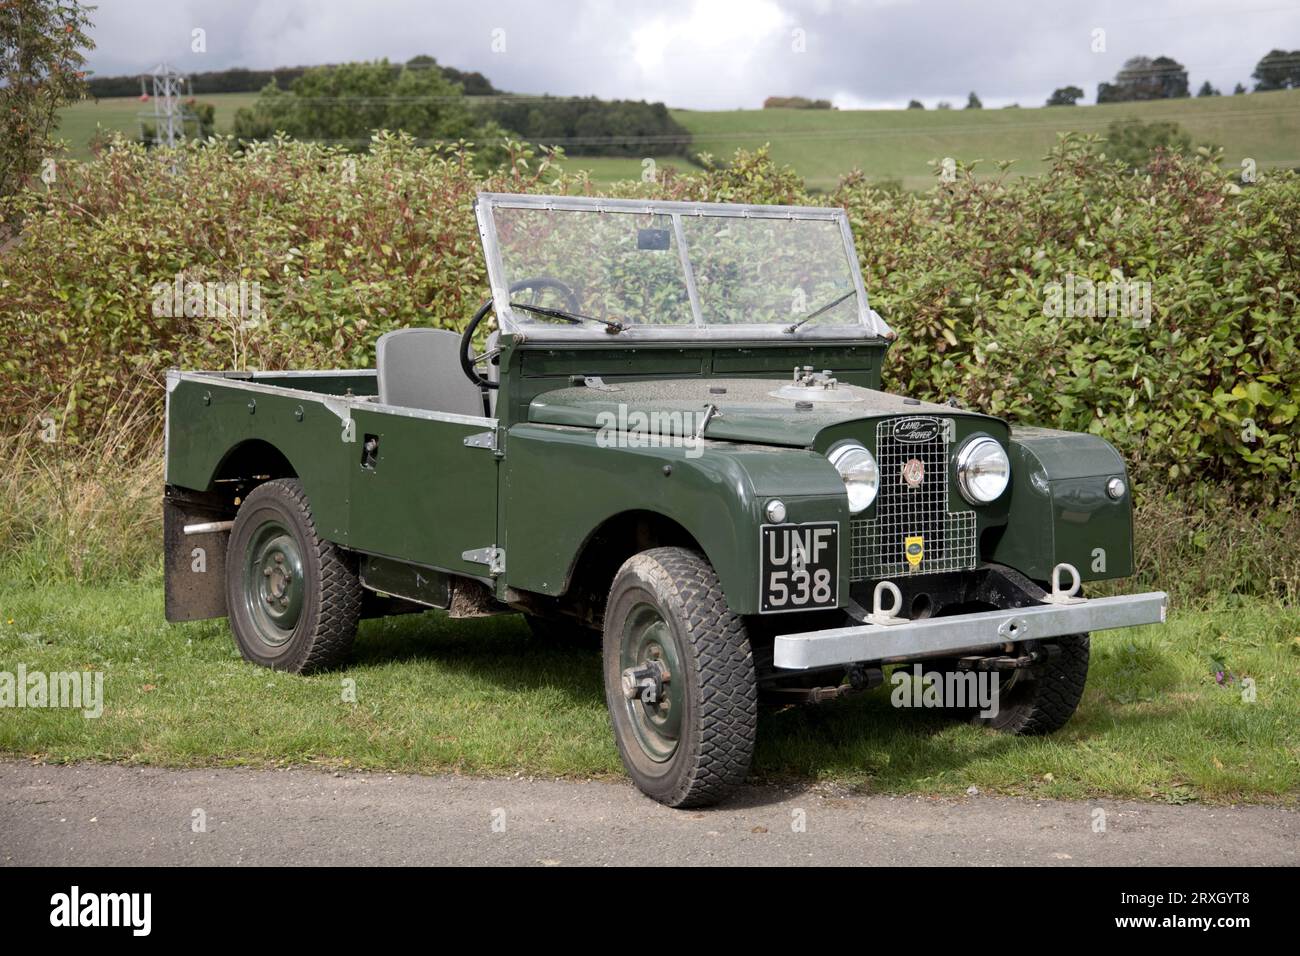 Fully restored 1956 green Series 1 Landrover parked on grass in front of hedge Colemans Hill Farm Mickleton Chipping Campden UK Stock Photo